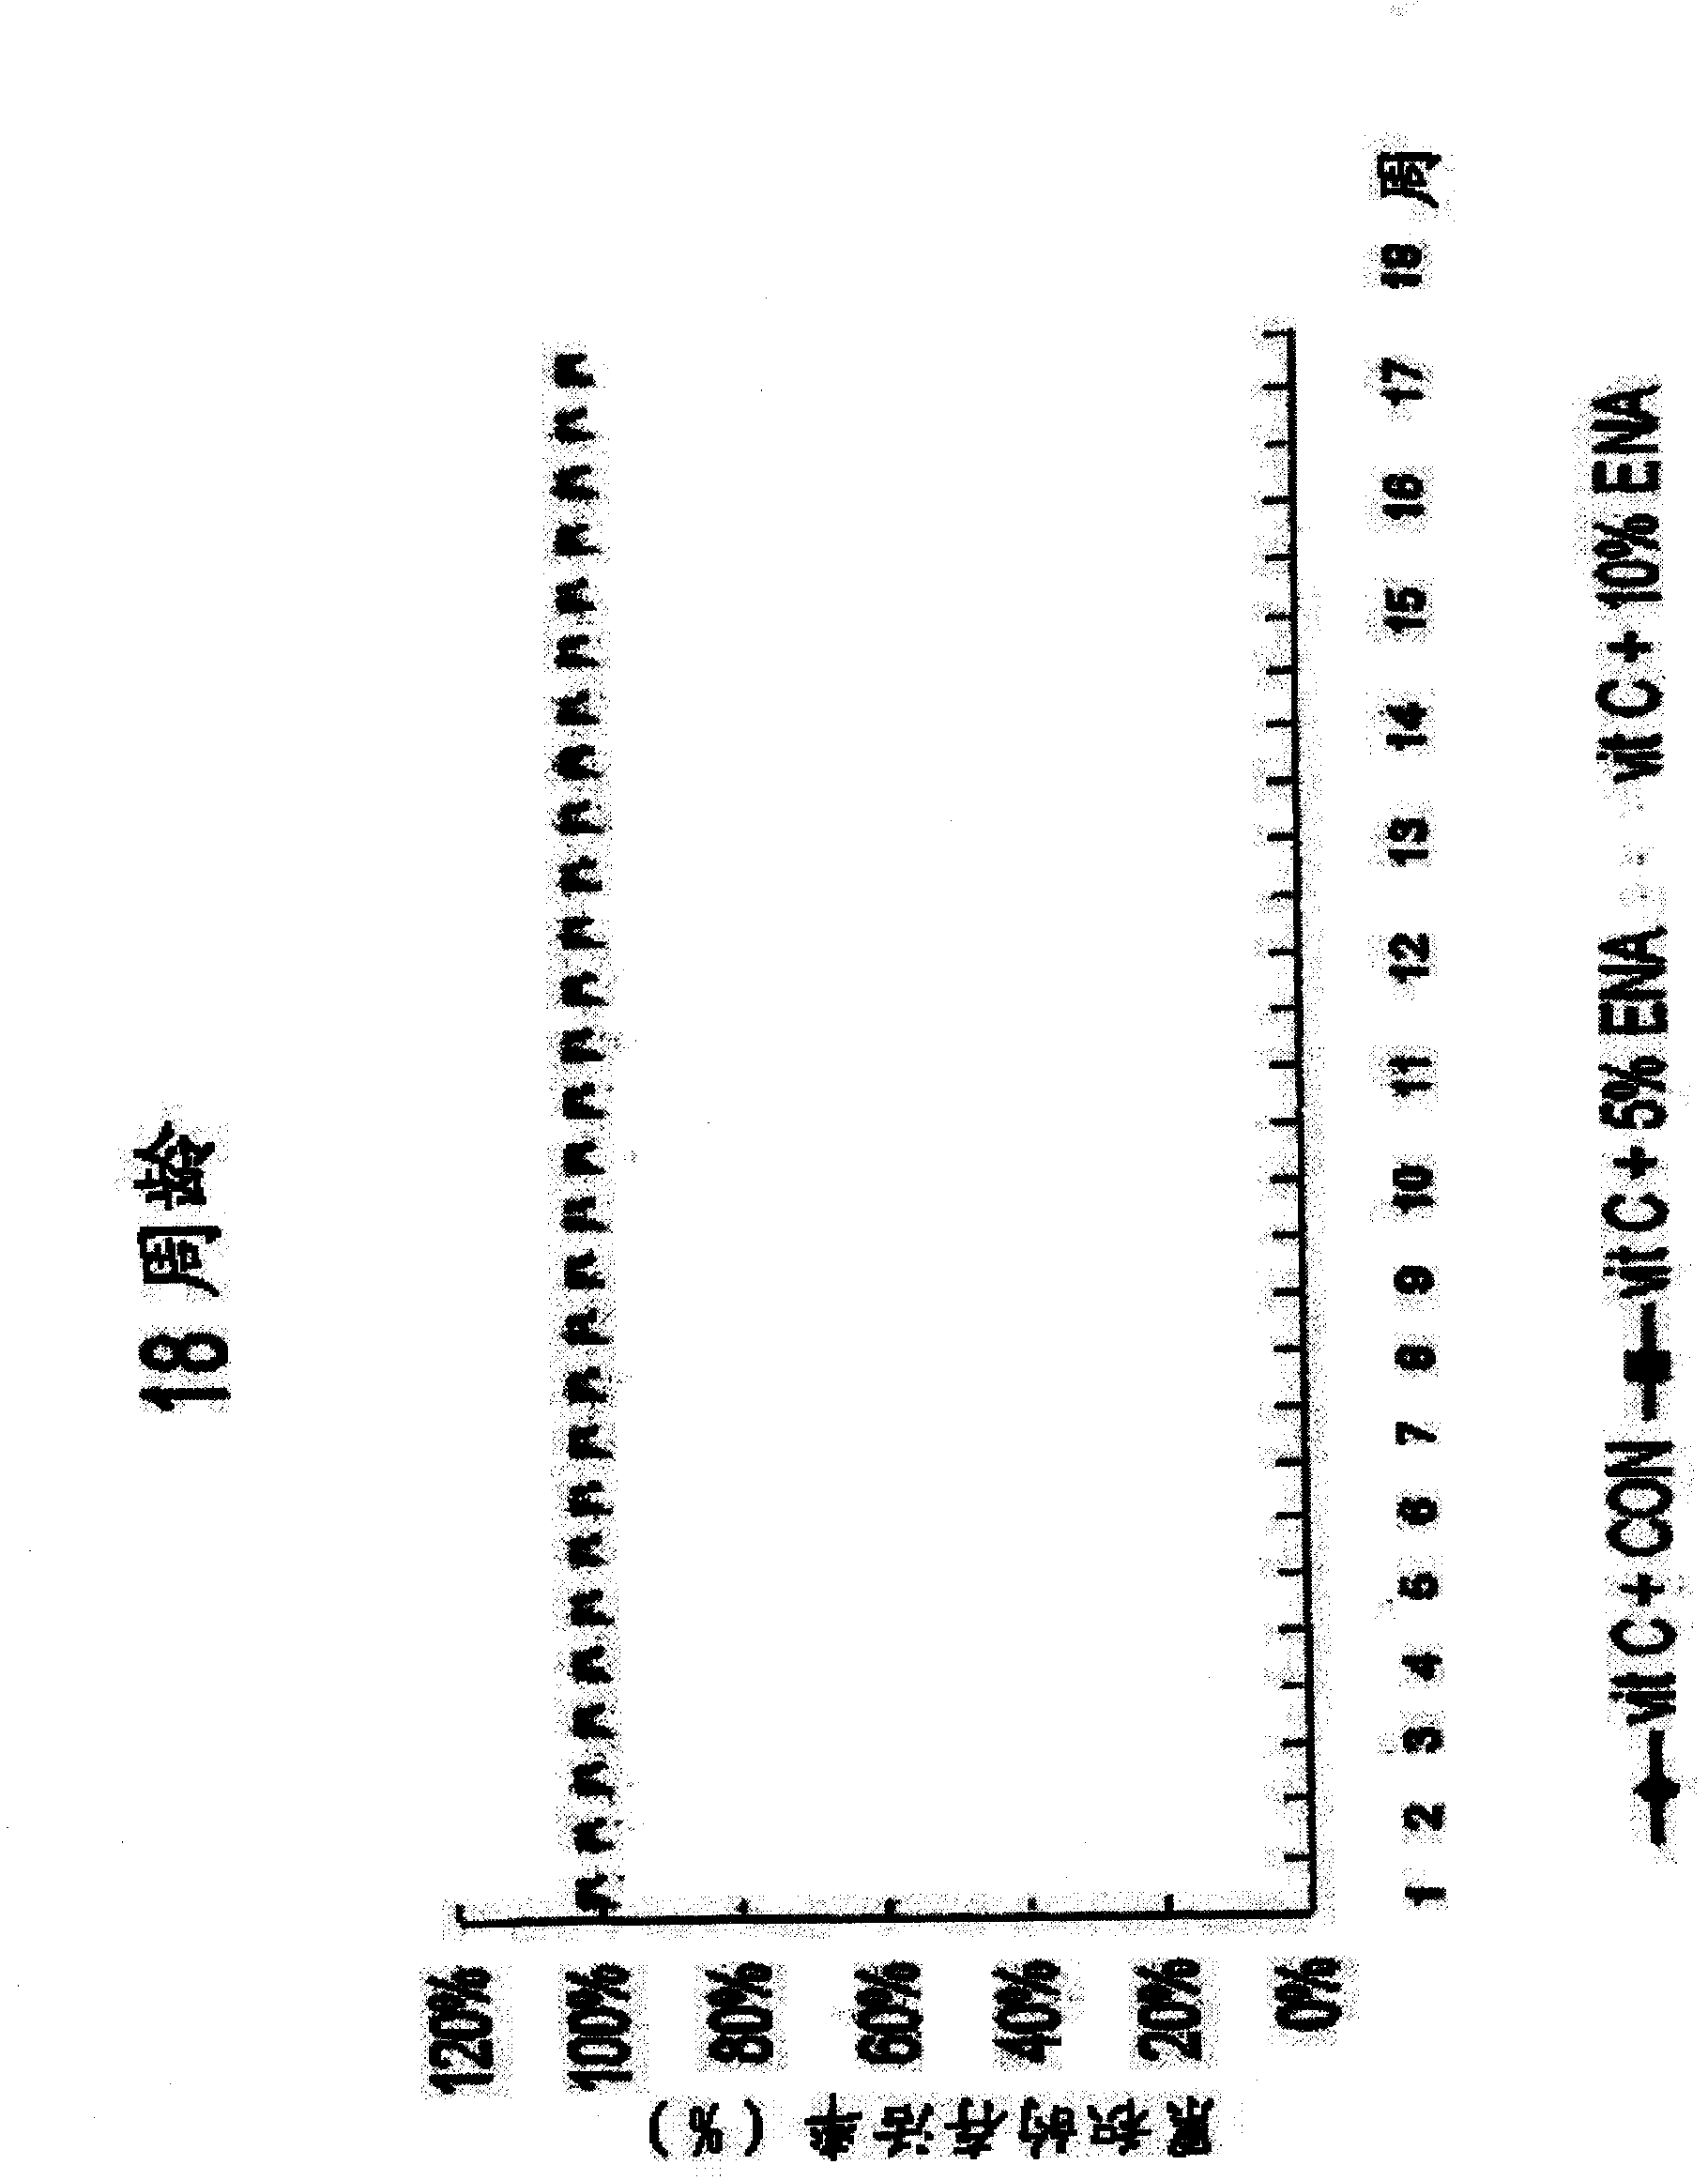 Pharmaceutical composition for preventing liver injury or improving liver function, containing the activated water of ENA actimineral resource A as an active ingredient